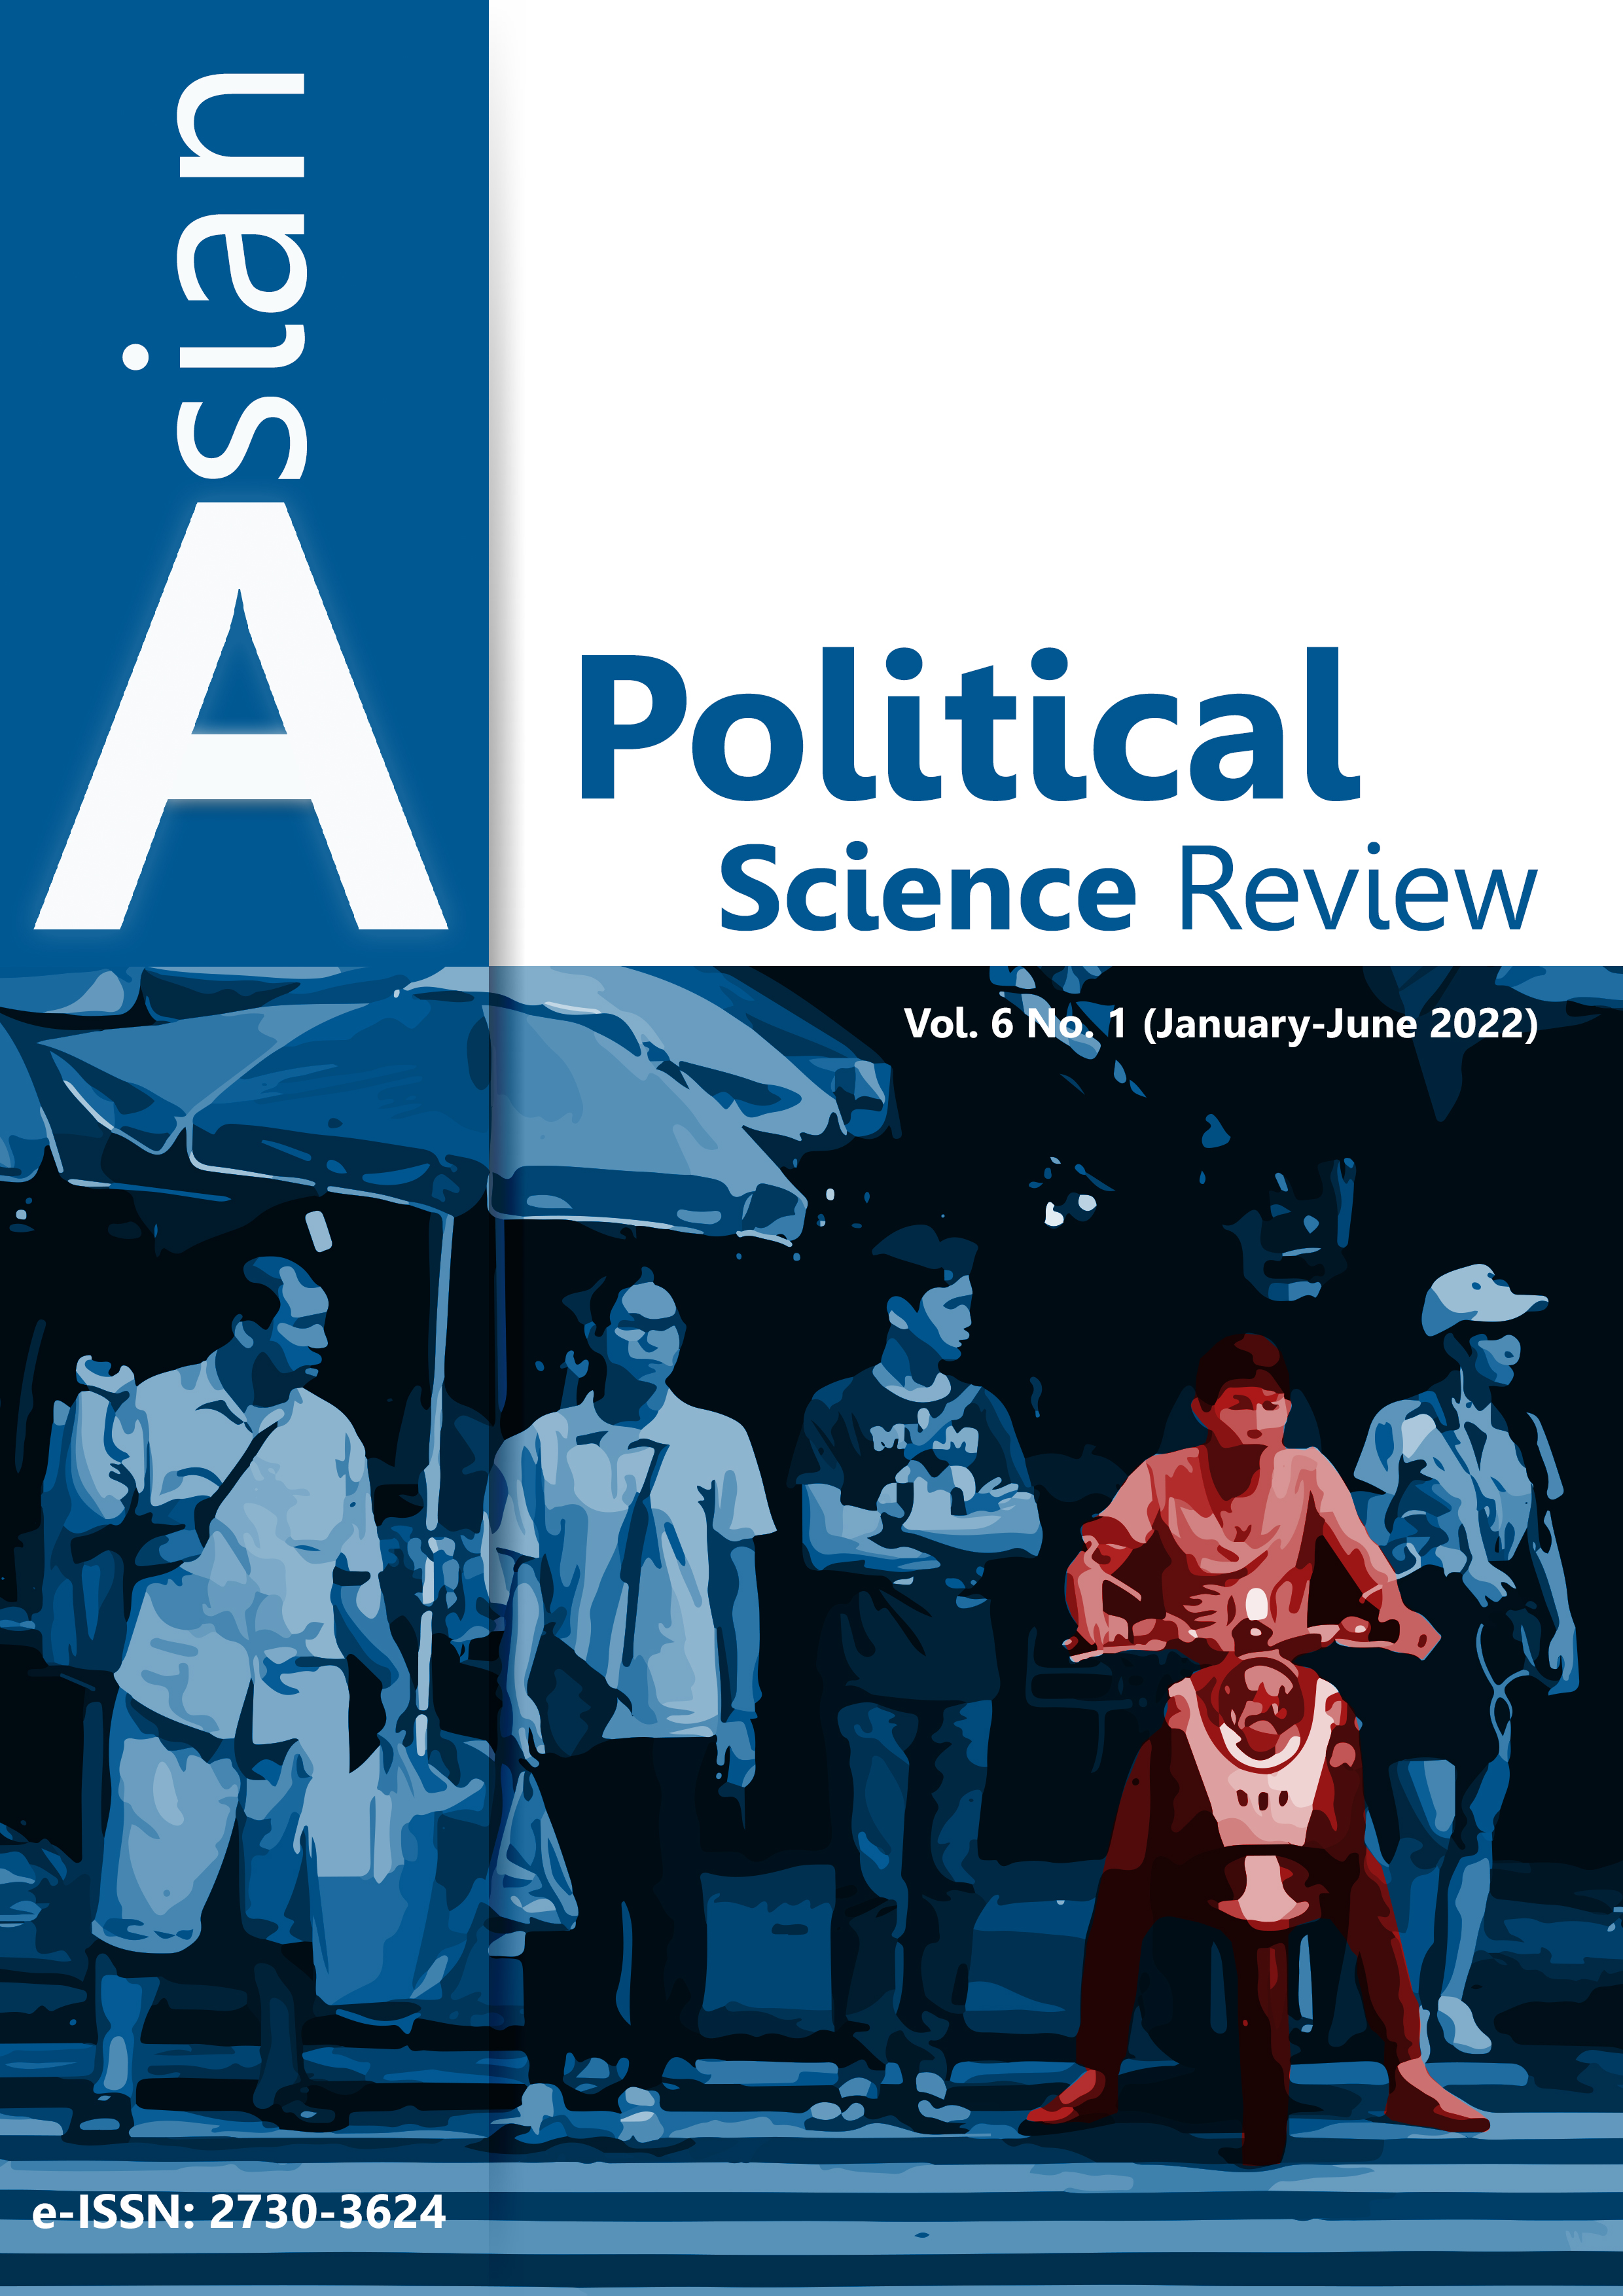 					View Vol. 6 No. 1 (2022): Asian Political Science Review
				